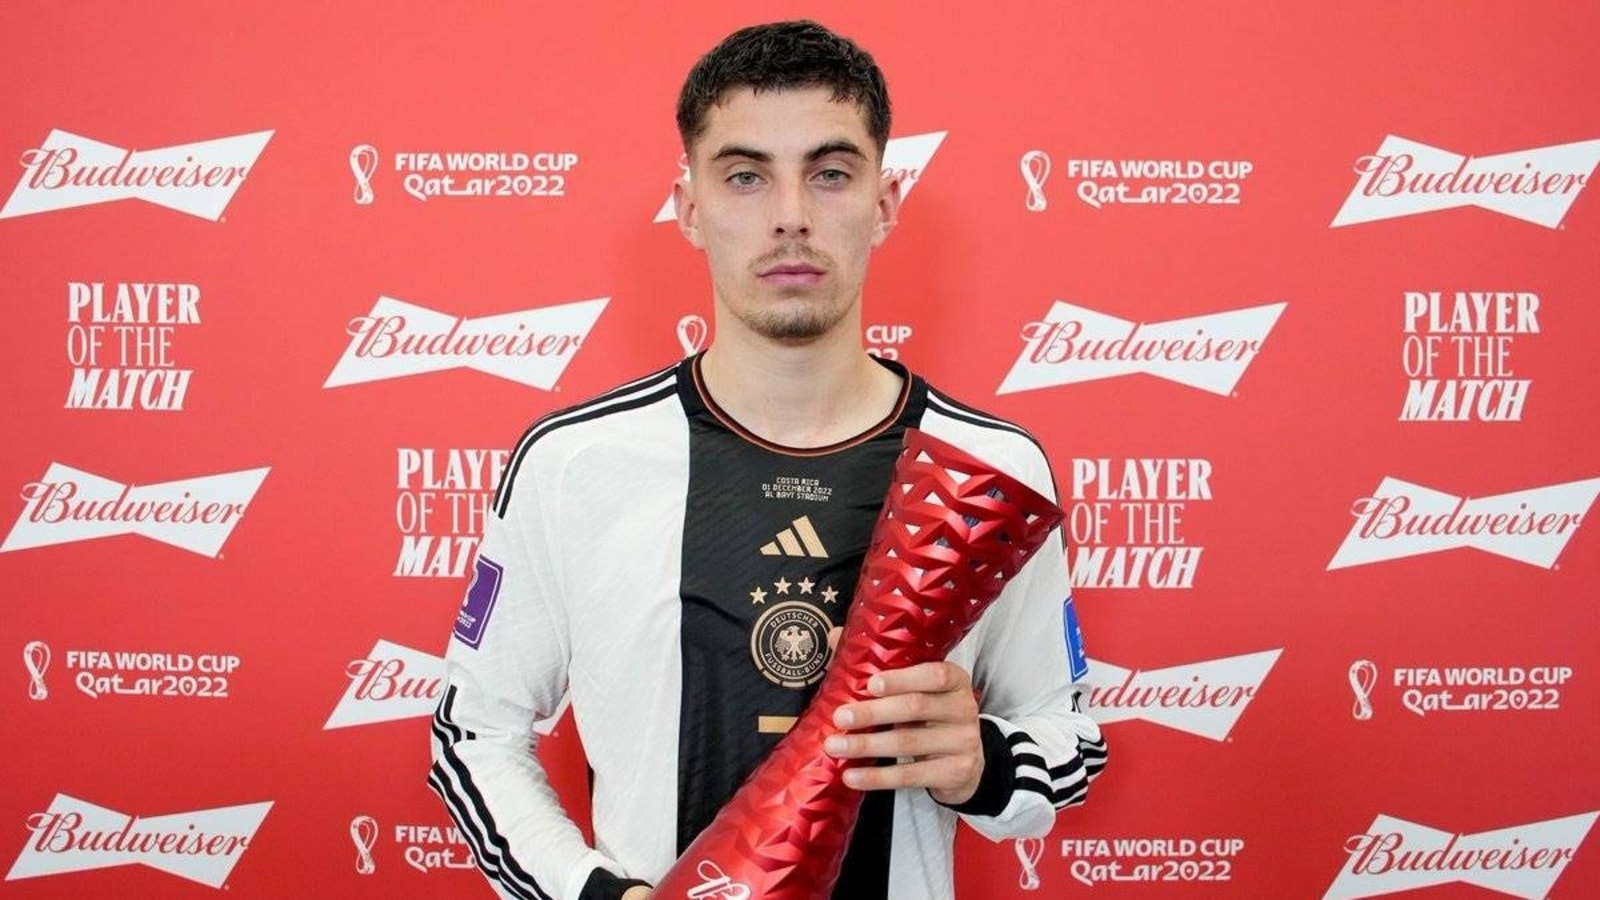 Watch: Glum-faced Kai Havertz accepts player of the match award after Germany gets knocked out of FIFA World Cup